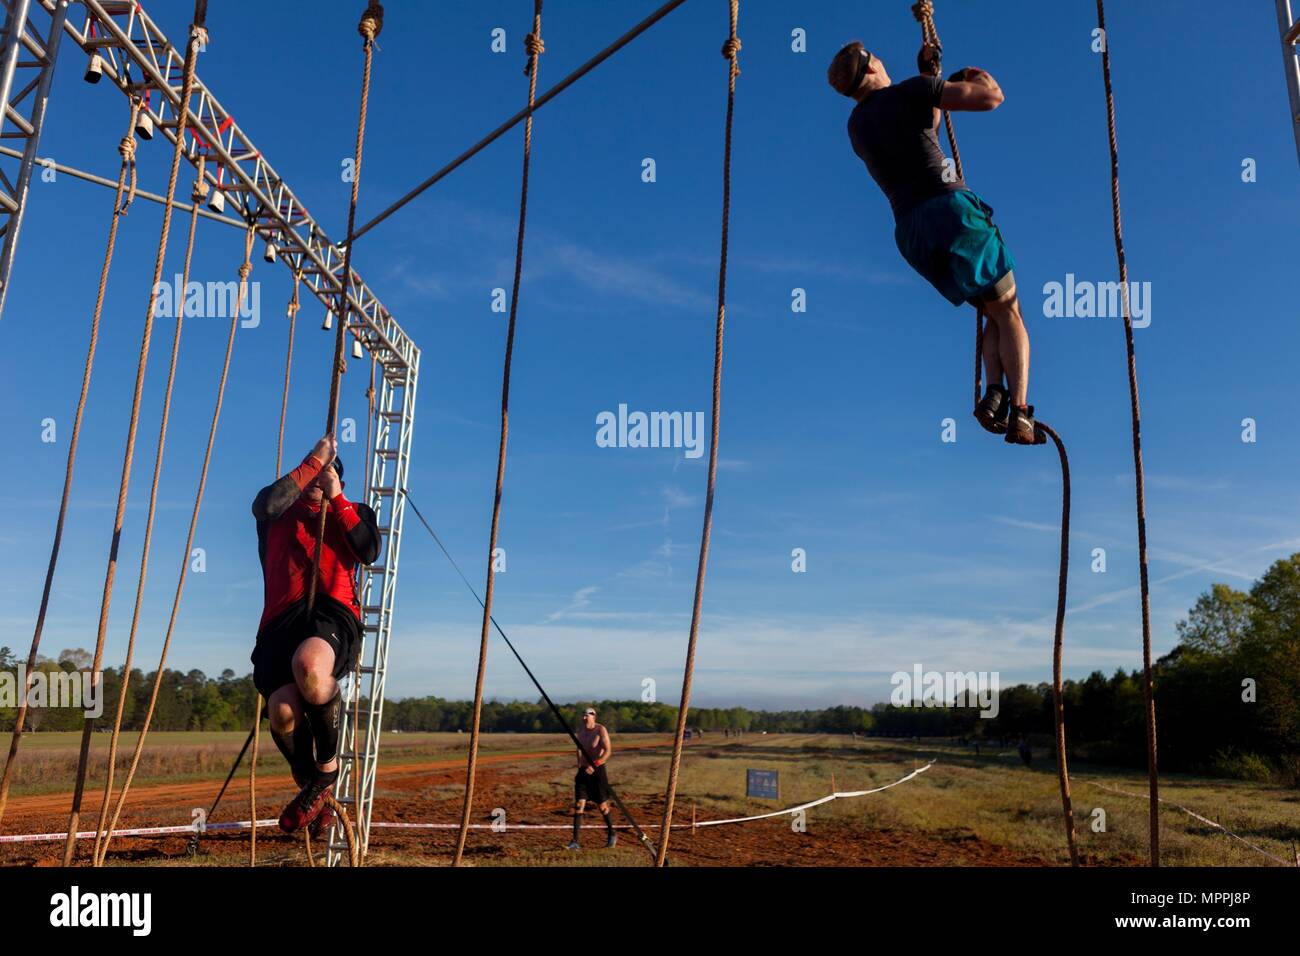 Spartan Race competitors perform a rope climb during a Spartan Race at the  Best Ranger Competition 2017 in Fort Mitchell, Ala., April 8, 2017. The  34th annual David E. Grange Jr. Best Ranger Competition 2017 is a three-day  event consisting of challenges